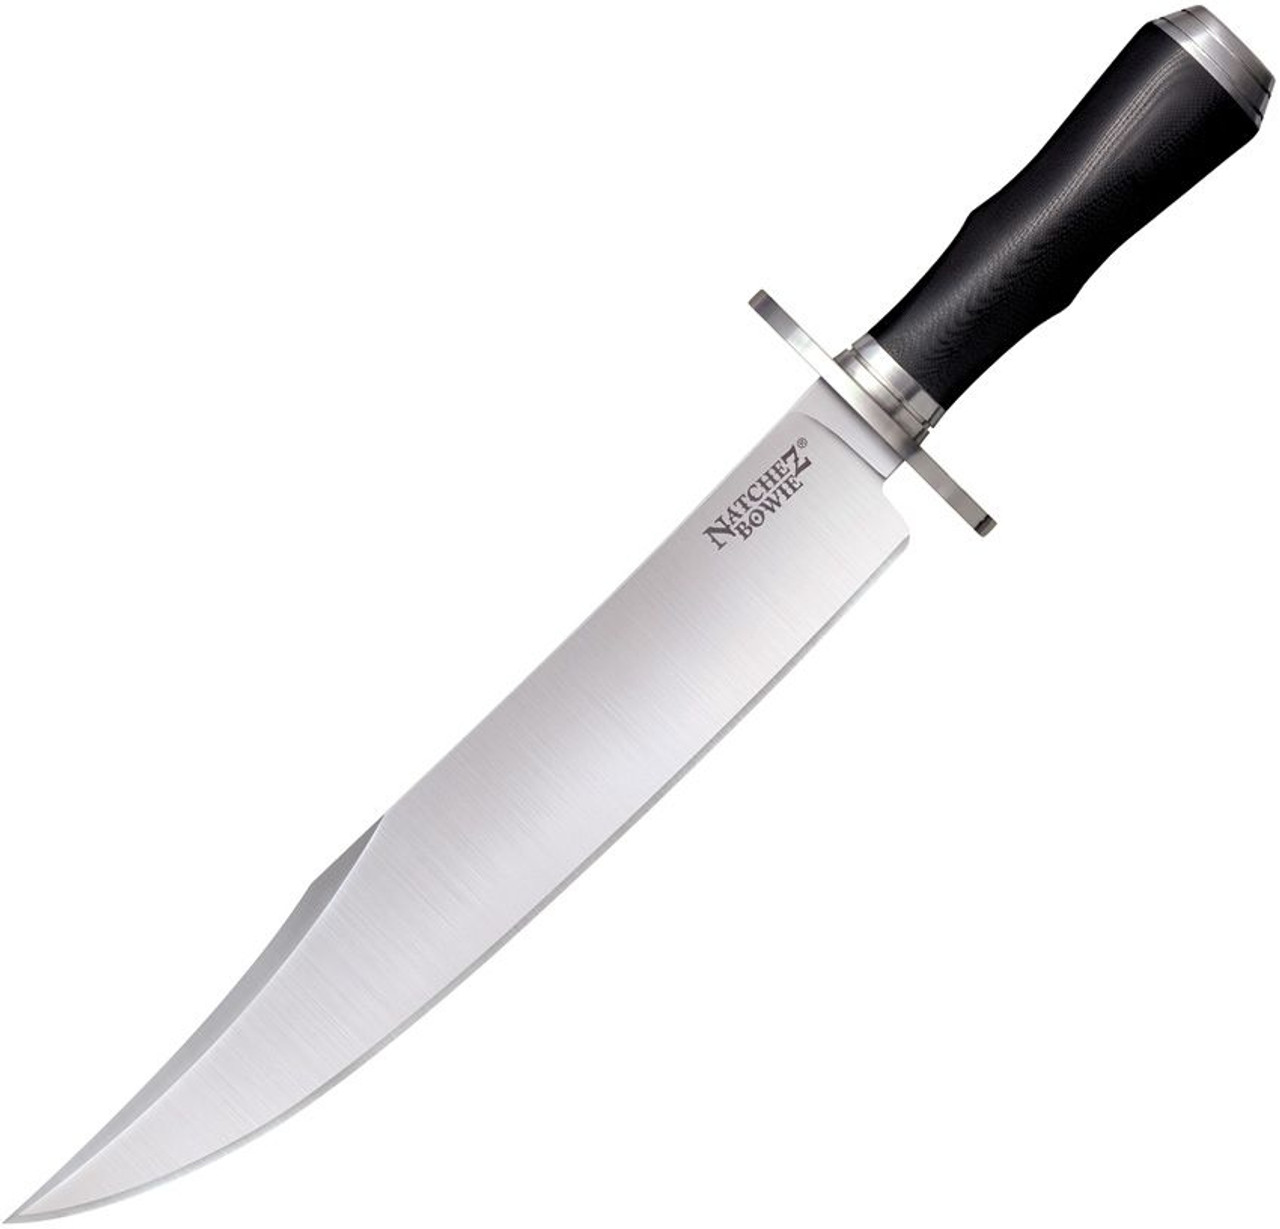 Cold Steel Natchez Bowie. 4034 stainless bowie blade.